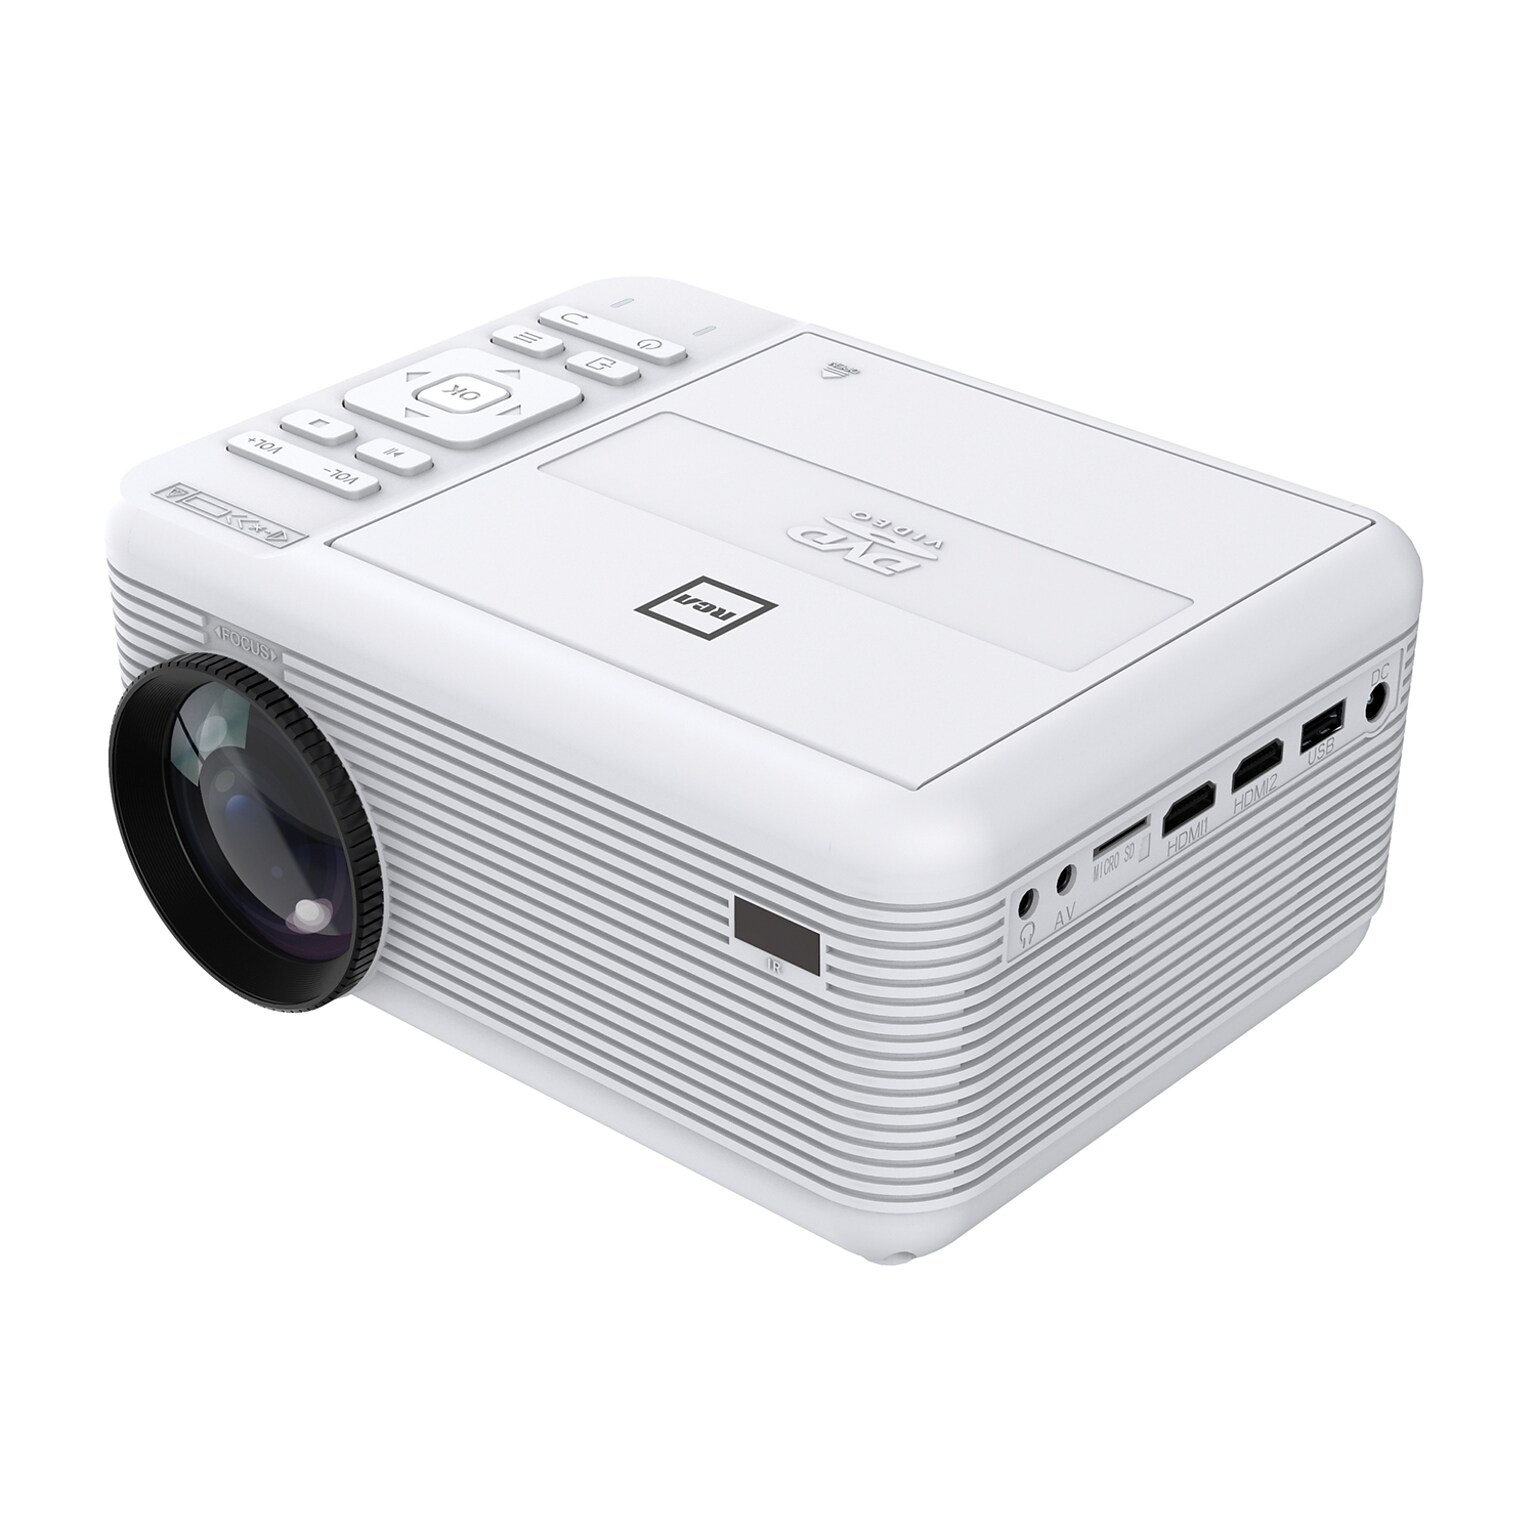 RCA Wireless Bluetooth 480p LCD Compact Projector with Built-in DVD Player, 100 Foldup Screen & Remote, White (RPJ241-COMBO)